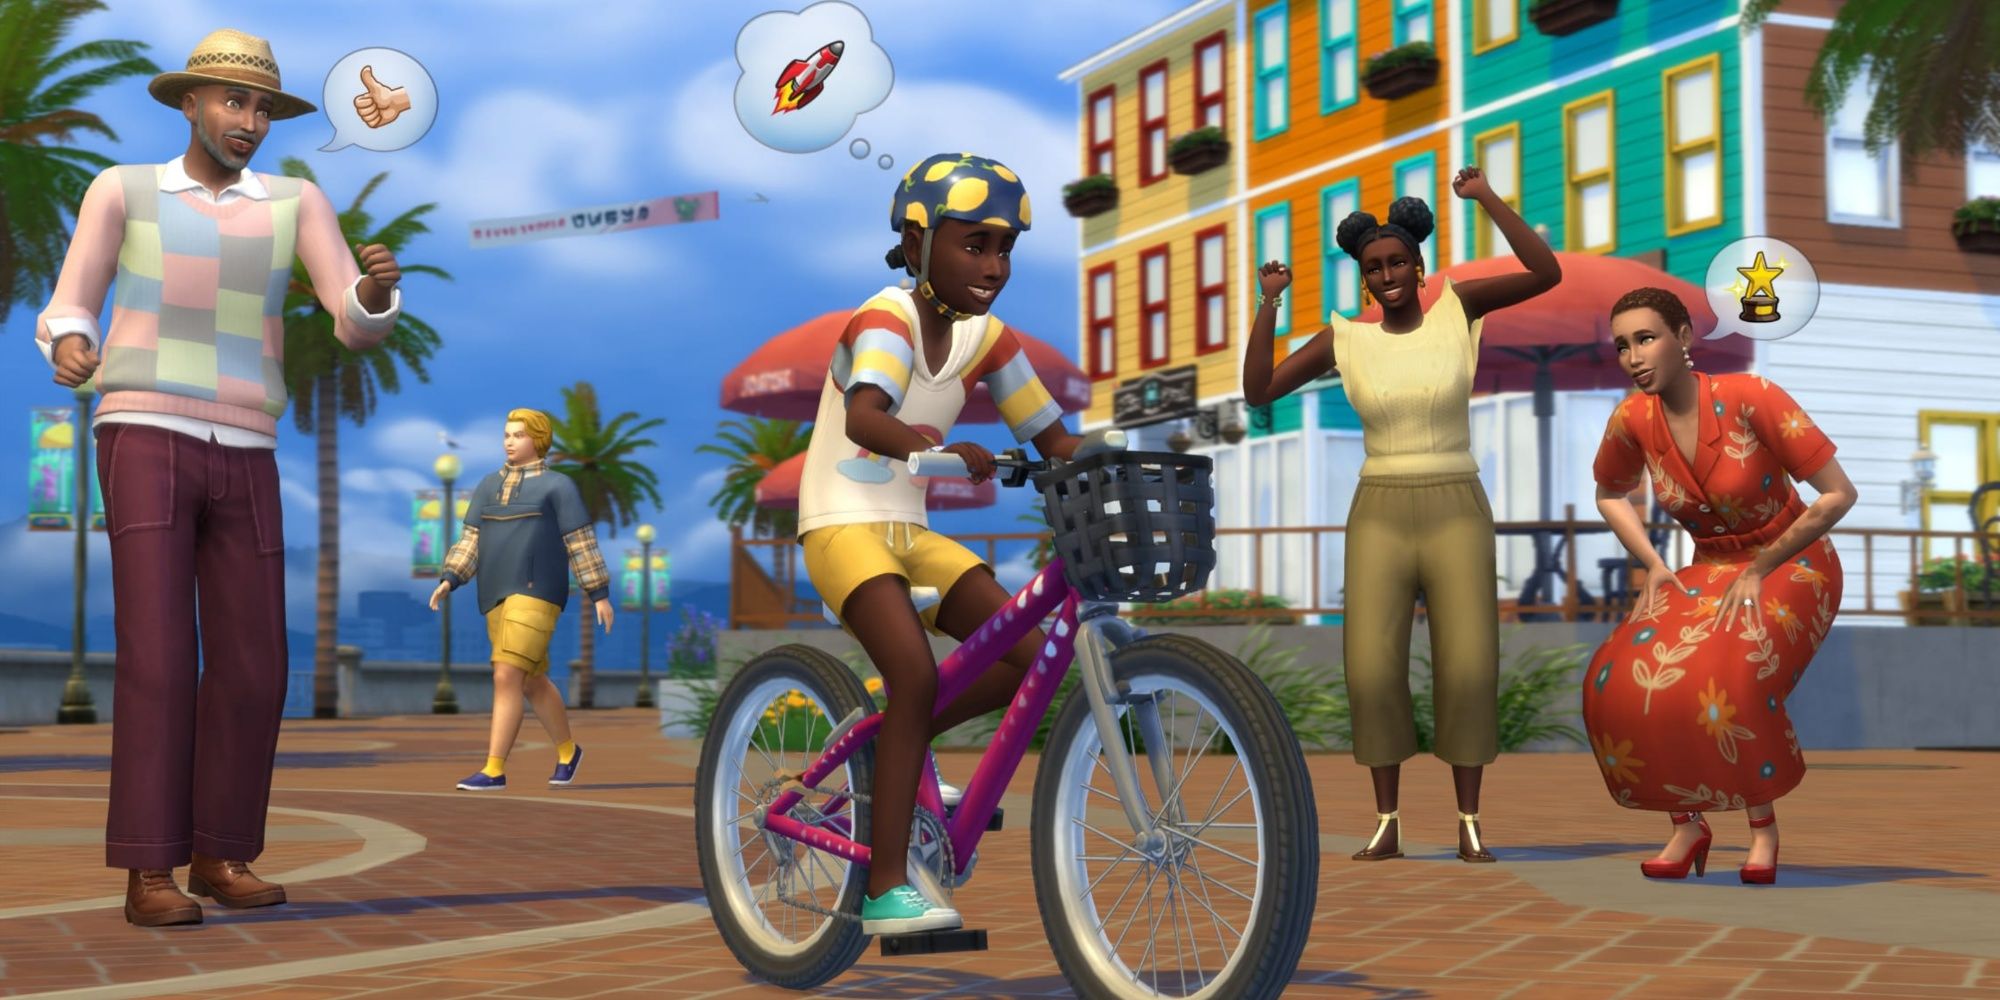 The Sims 4 Growing Together - A child Sim learns to ride a bike while happy family members watch